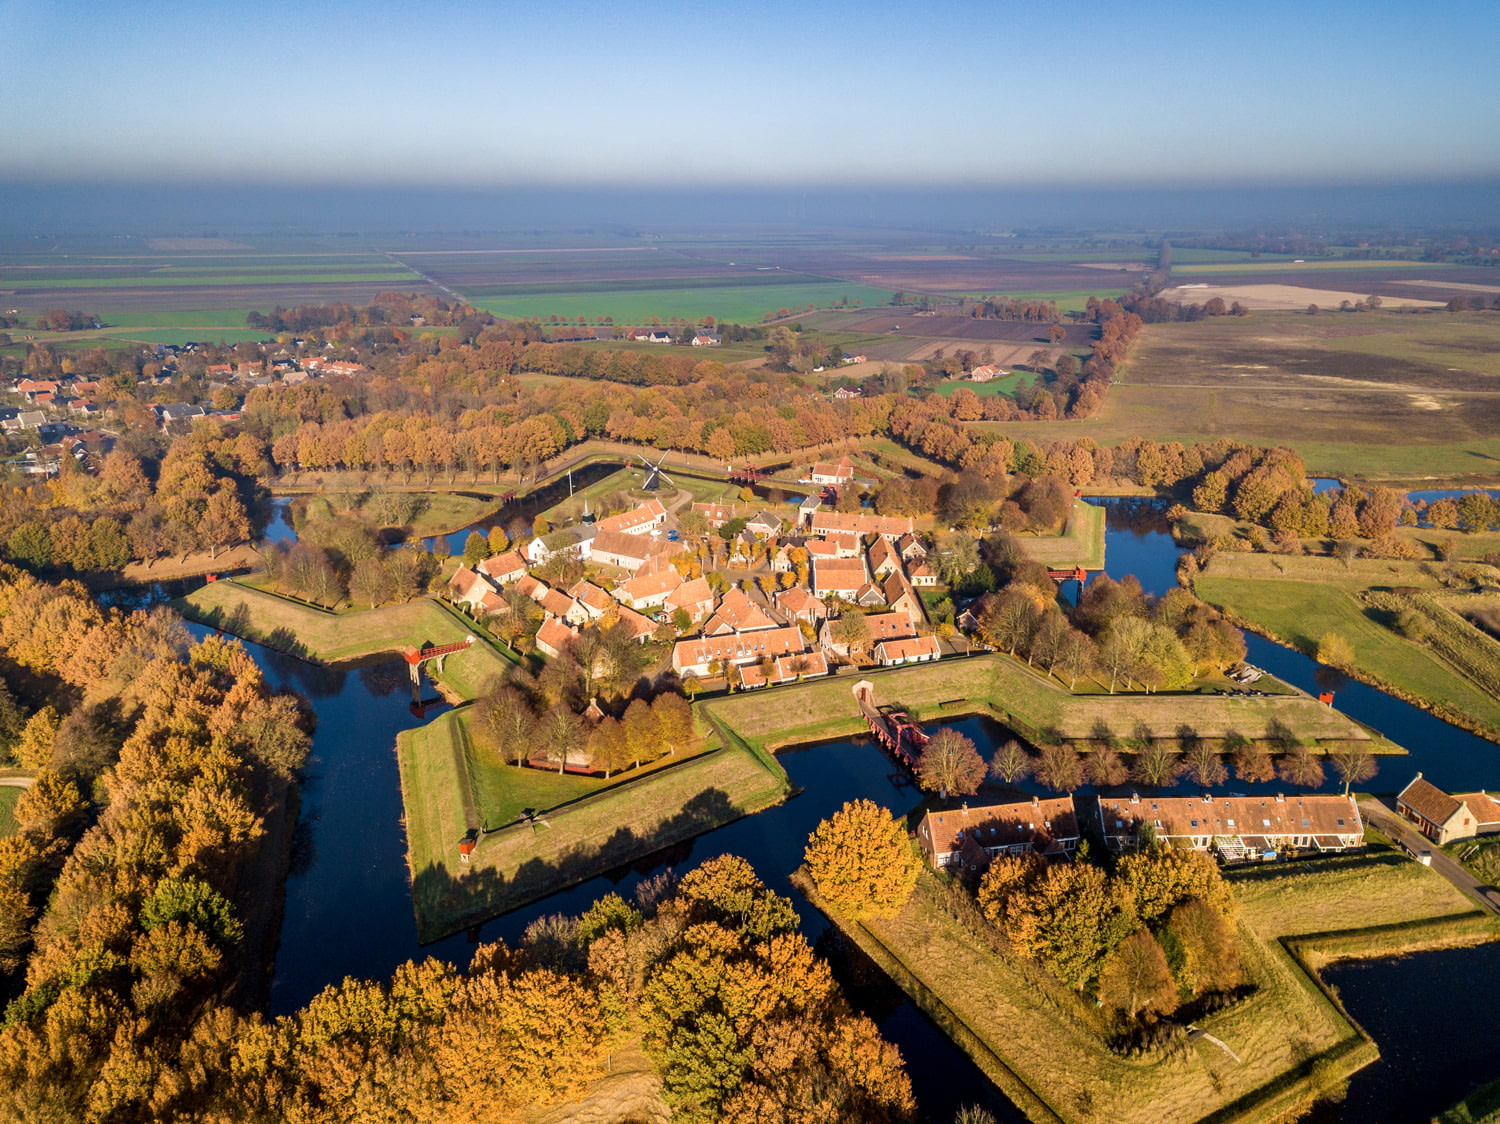 The Bourtange fortress